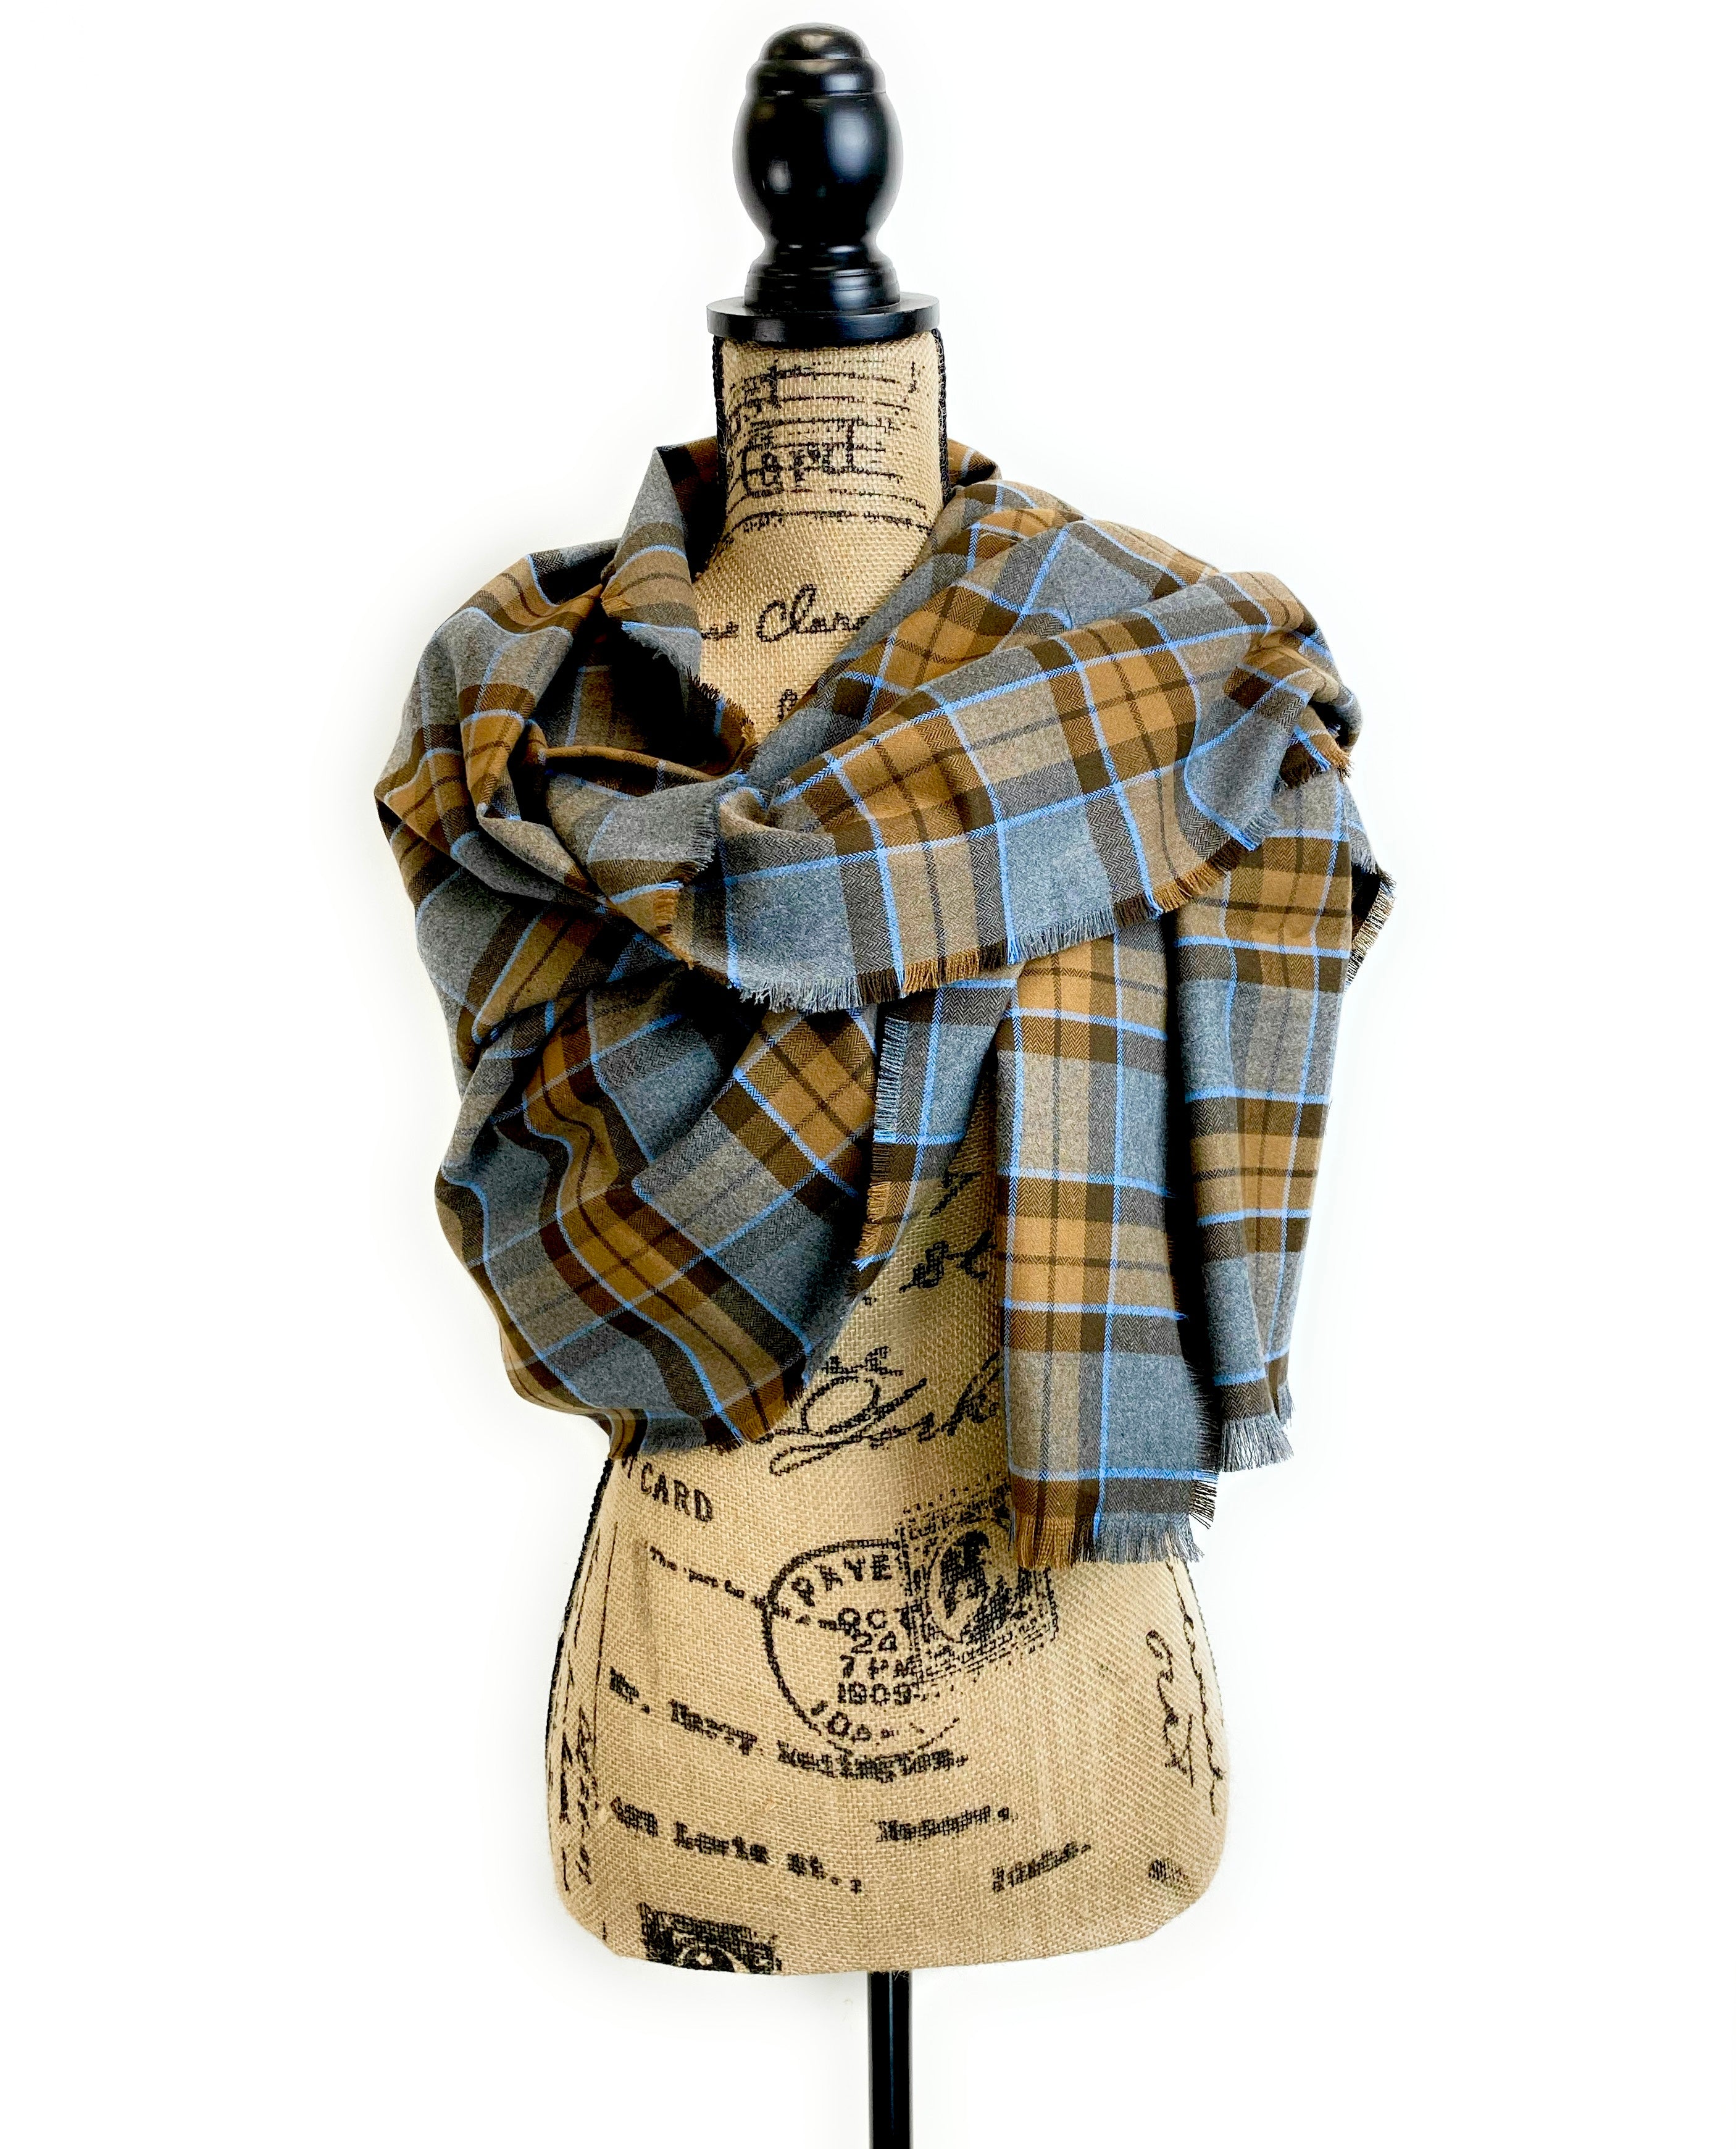 Wrap Size Scarf - Outlander Clan MacKenzie Inspired Gray, Brown and Light Blue Cotton Flannel